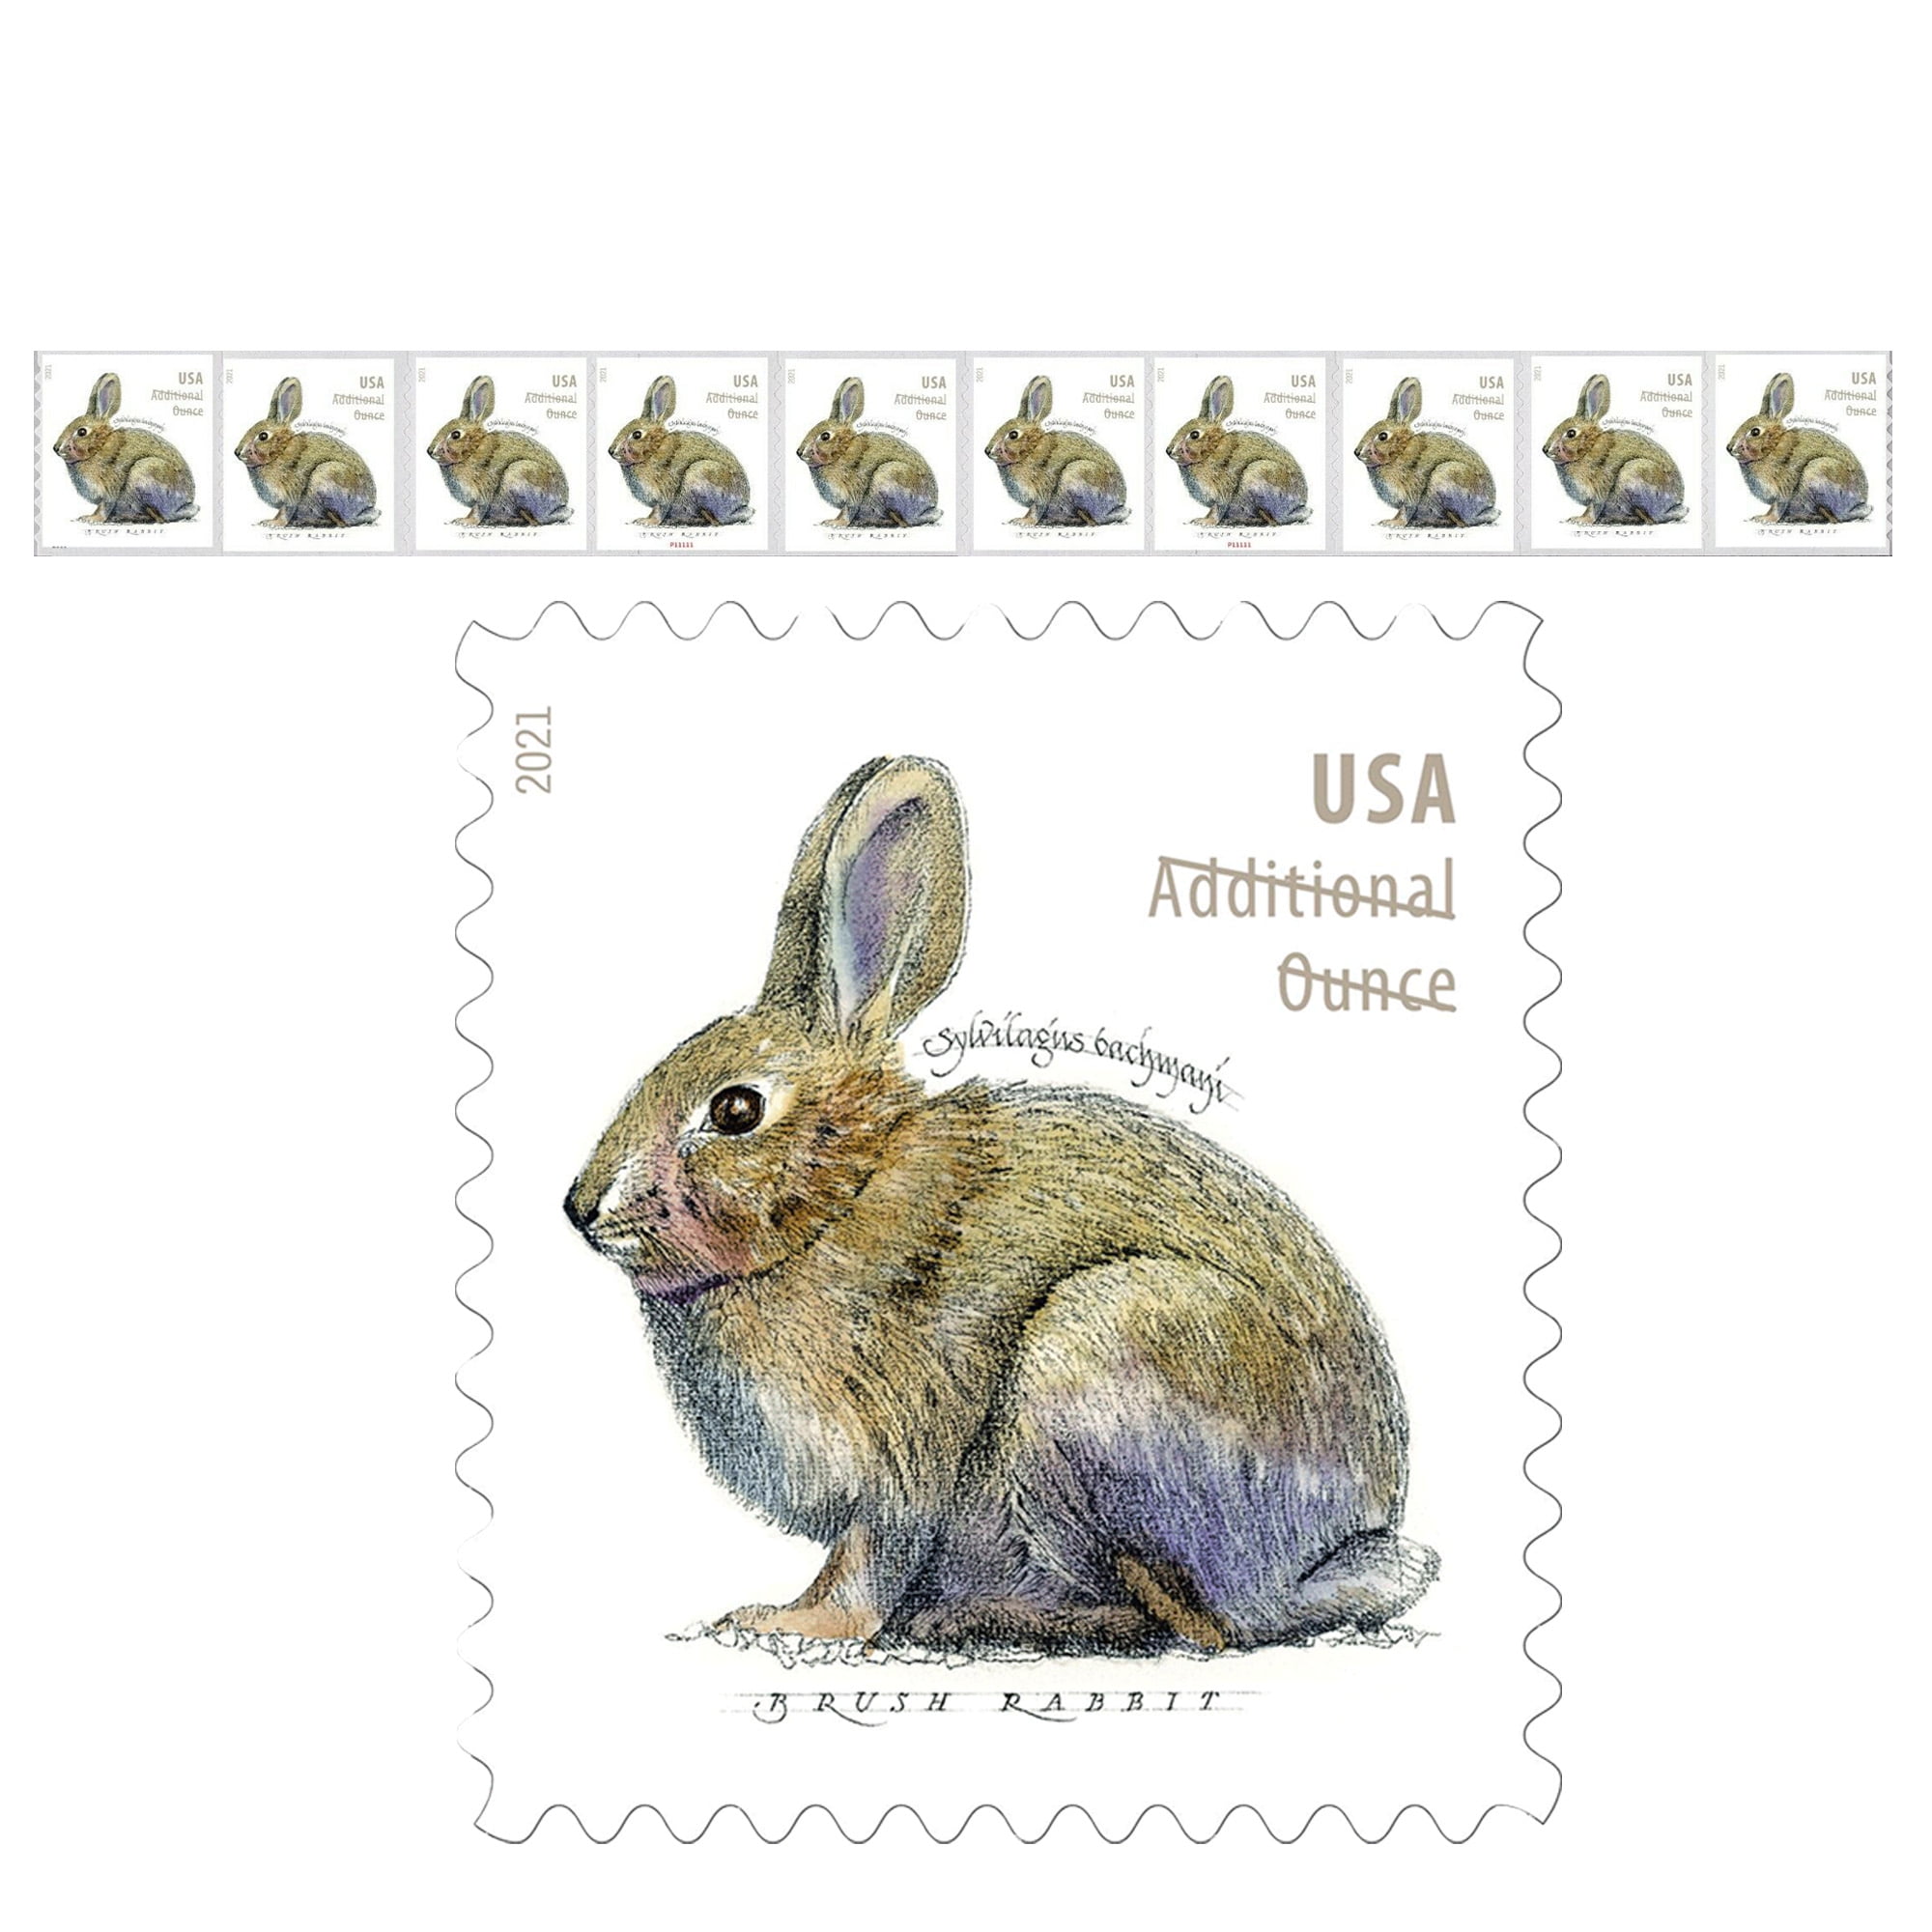 Brush Rabbit ADDITIONAL Ounce Rate USPS Postage Stamp 1 Strip of 10 US